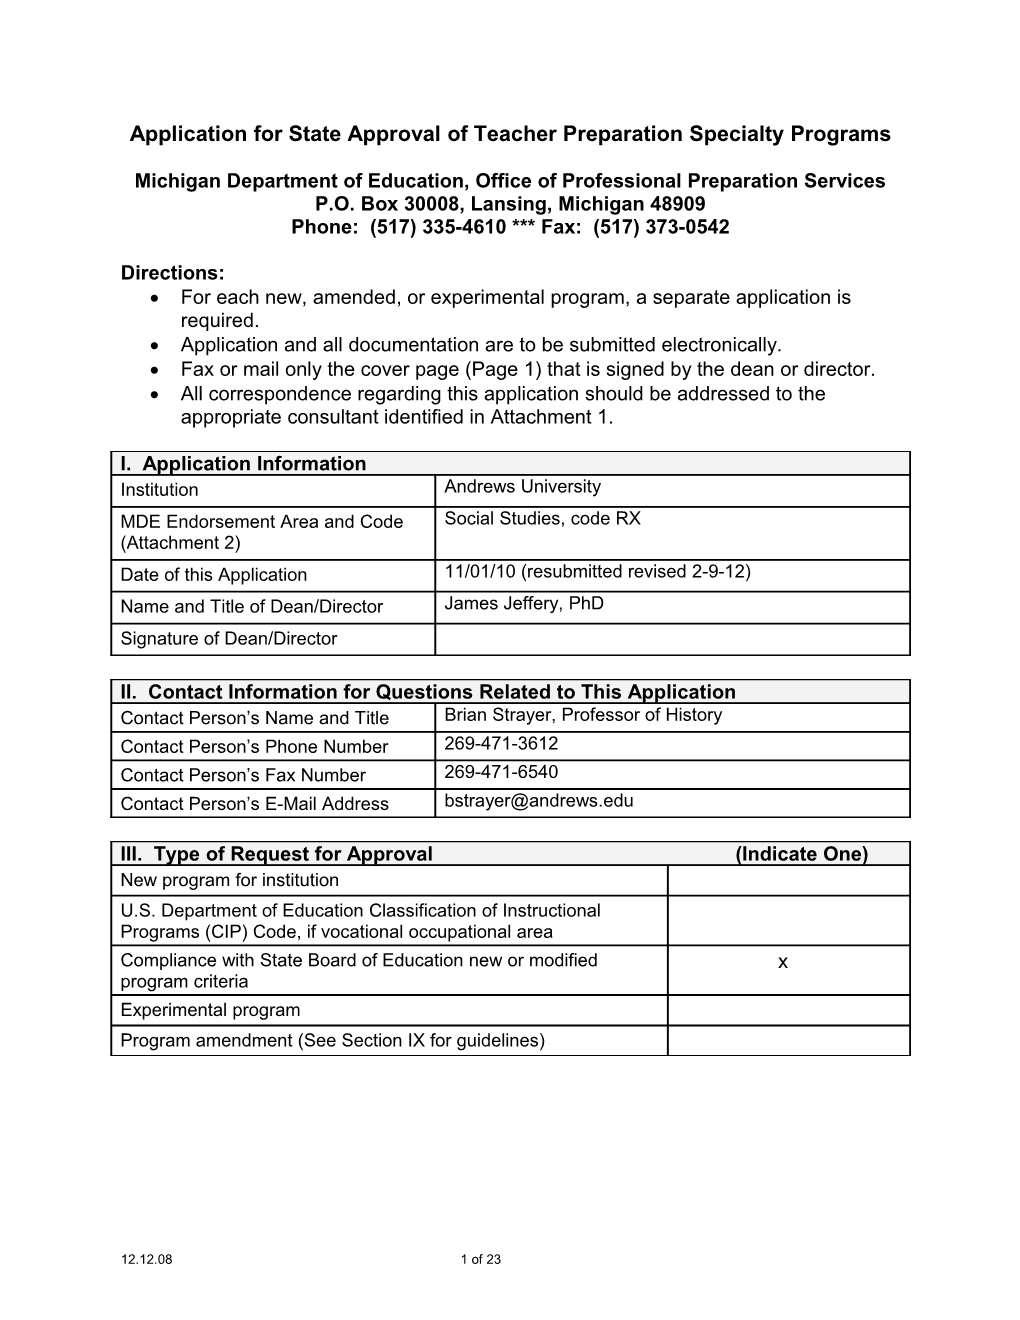 Application for State Approval of Teacher Preparation Specialty Programs